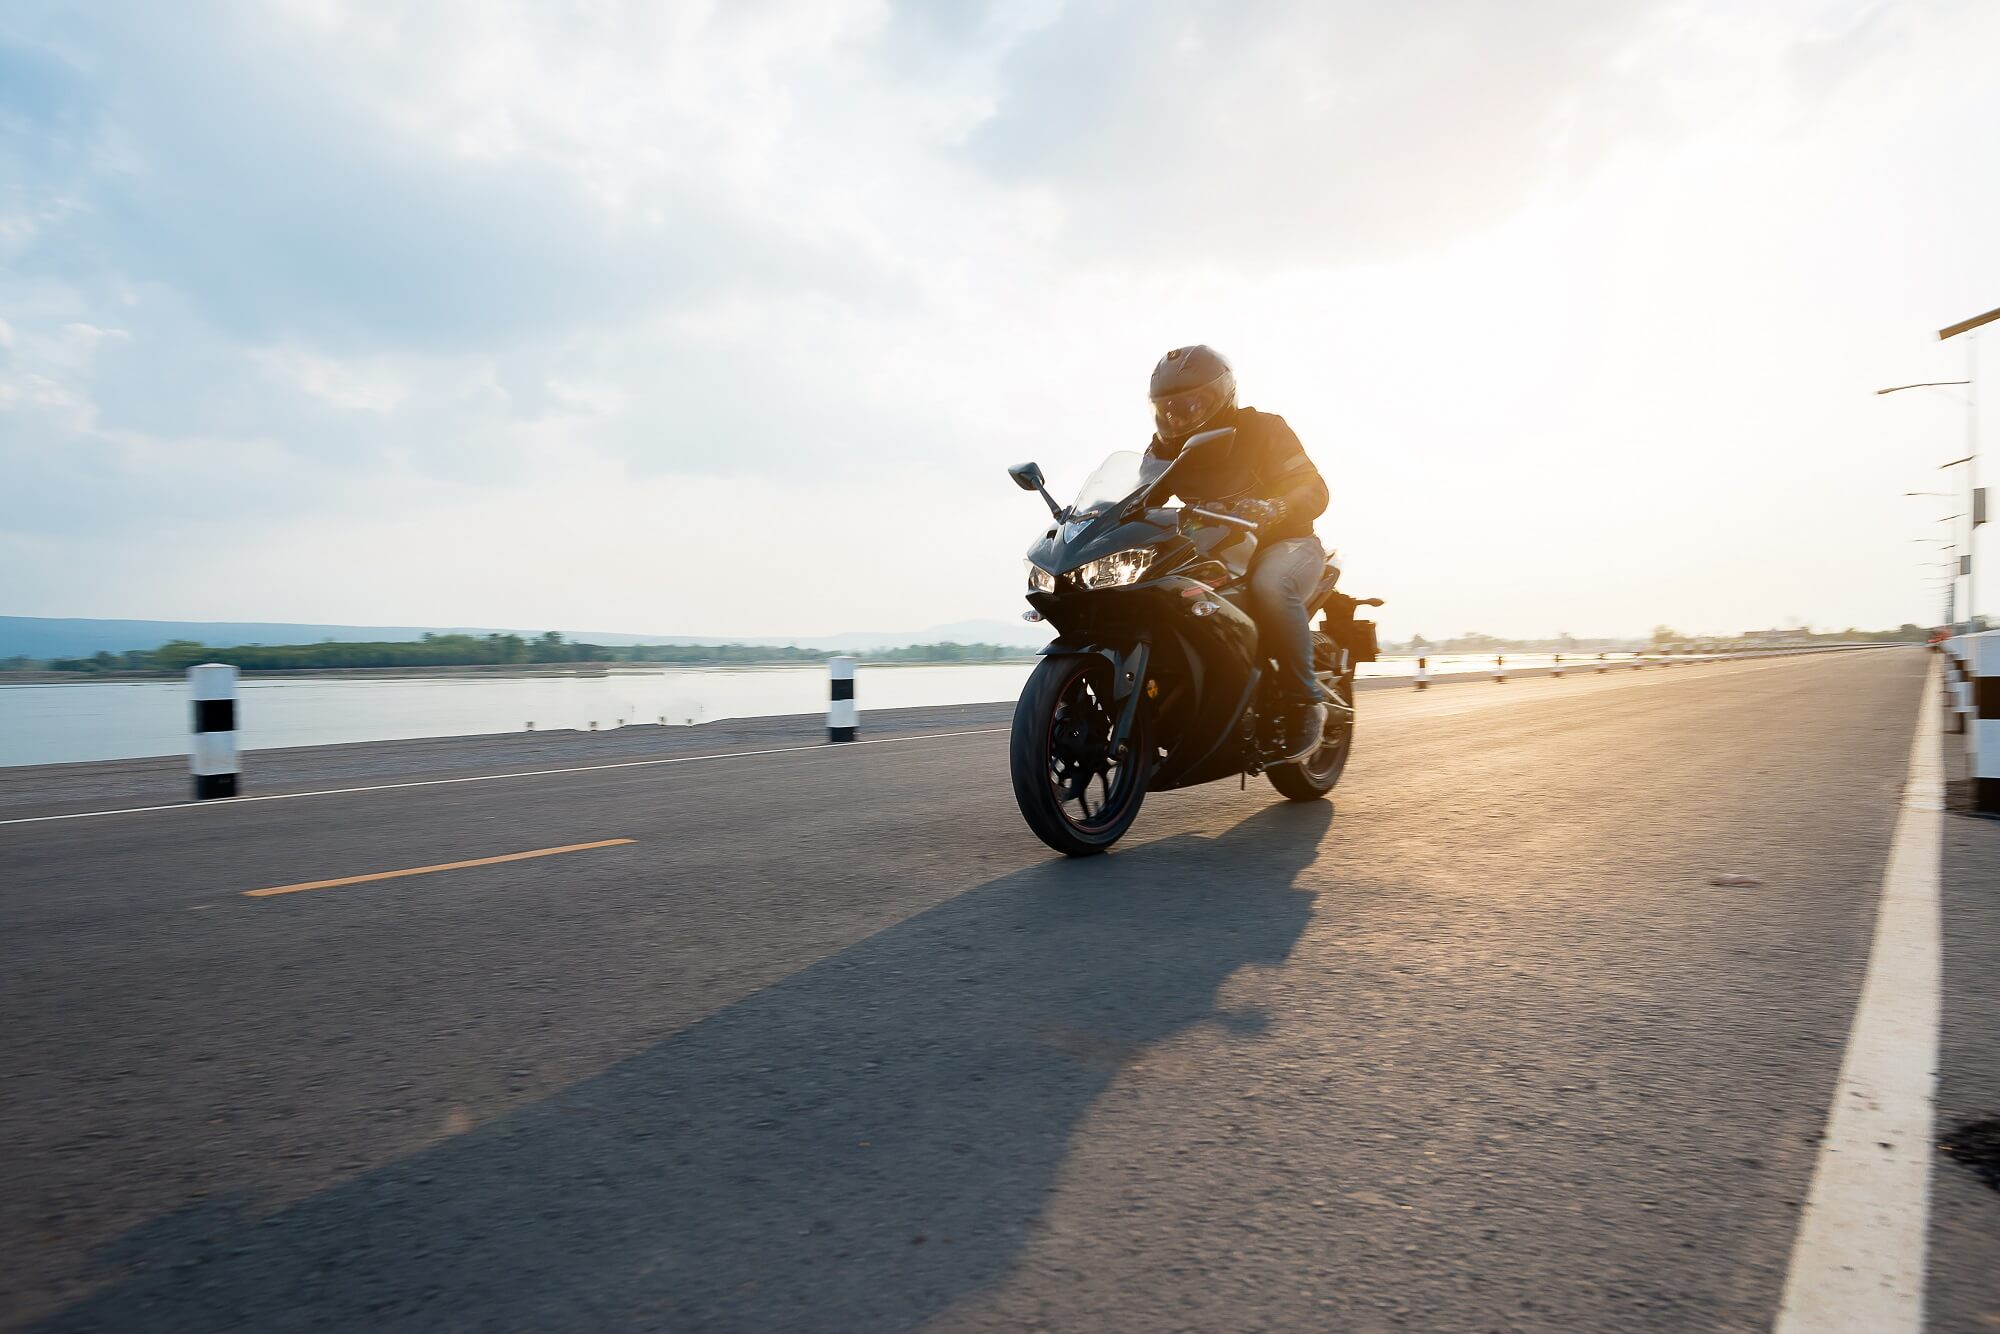 The best type of motorcycles for touring in Asia